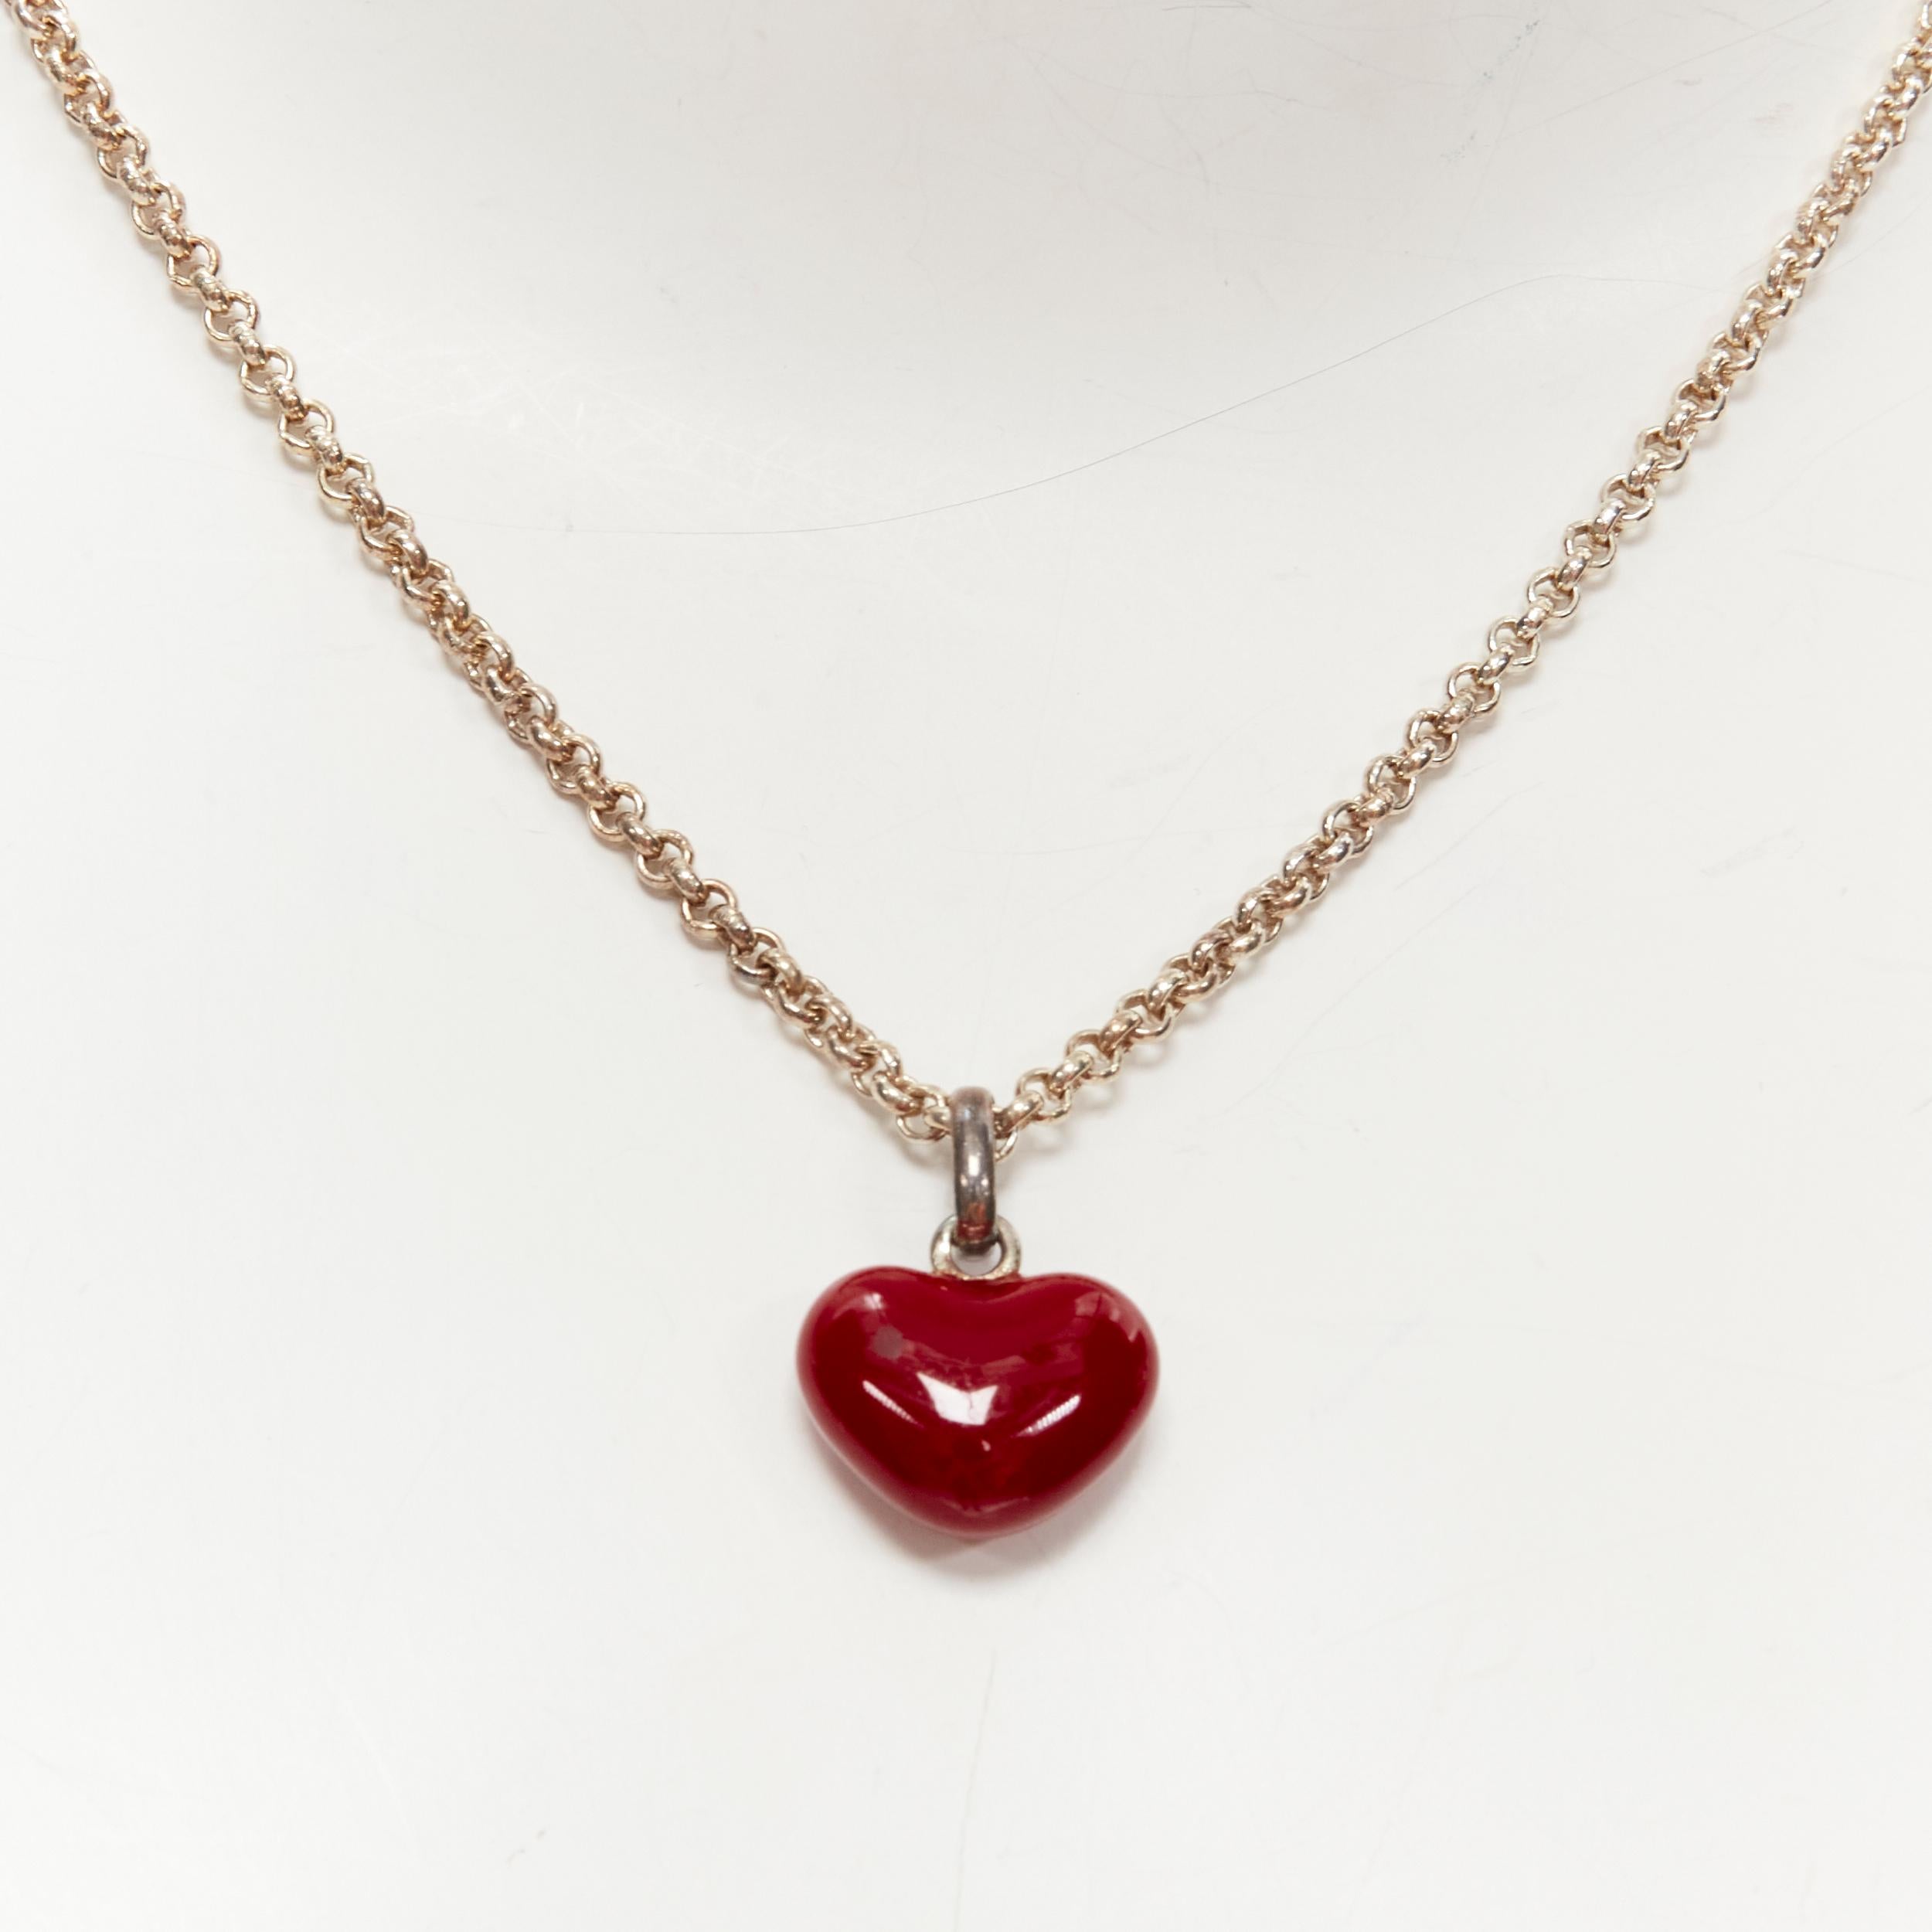 LINKS OF LONDON 925 silver red heart charm pendant chain necklace
Reference: ANWU/A00278
Brand: Links of London
Material: Metal
Color: Red, Silver
Pattern: Solid
Closure: Push Clasp

CONDITION:
Condition: Fair, this item was pre-owned and is in fair